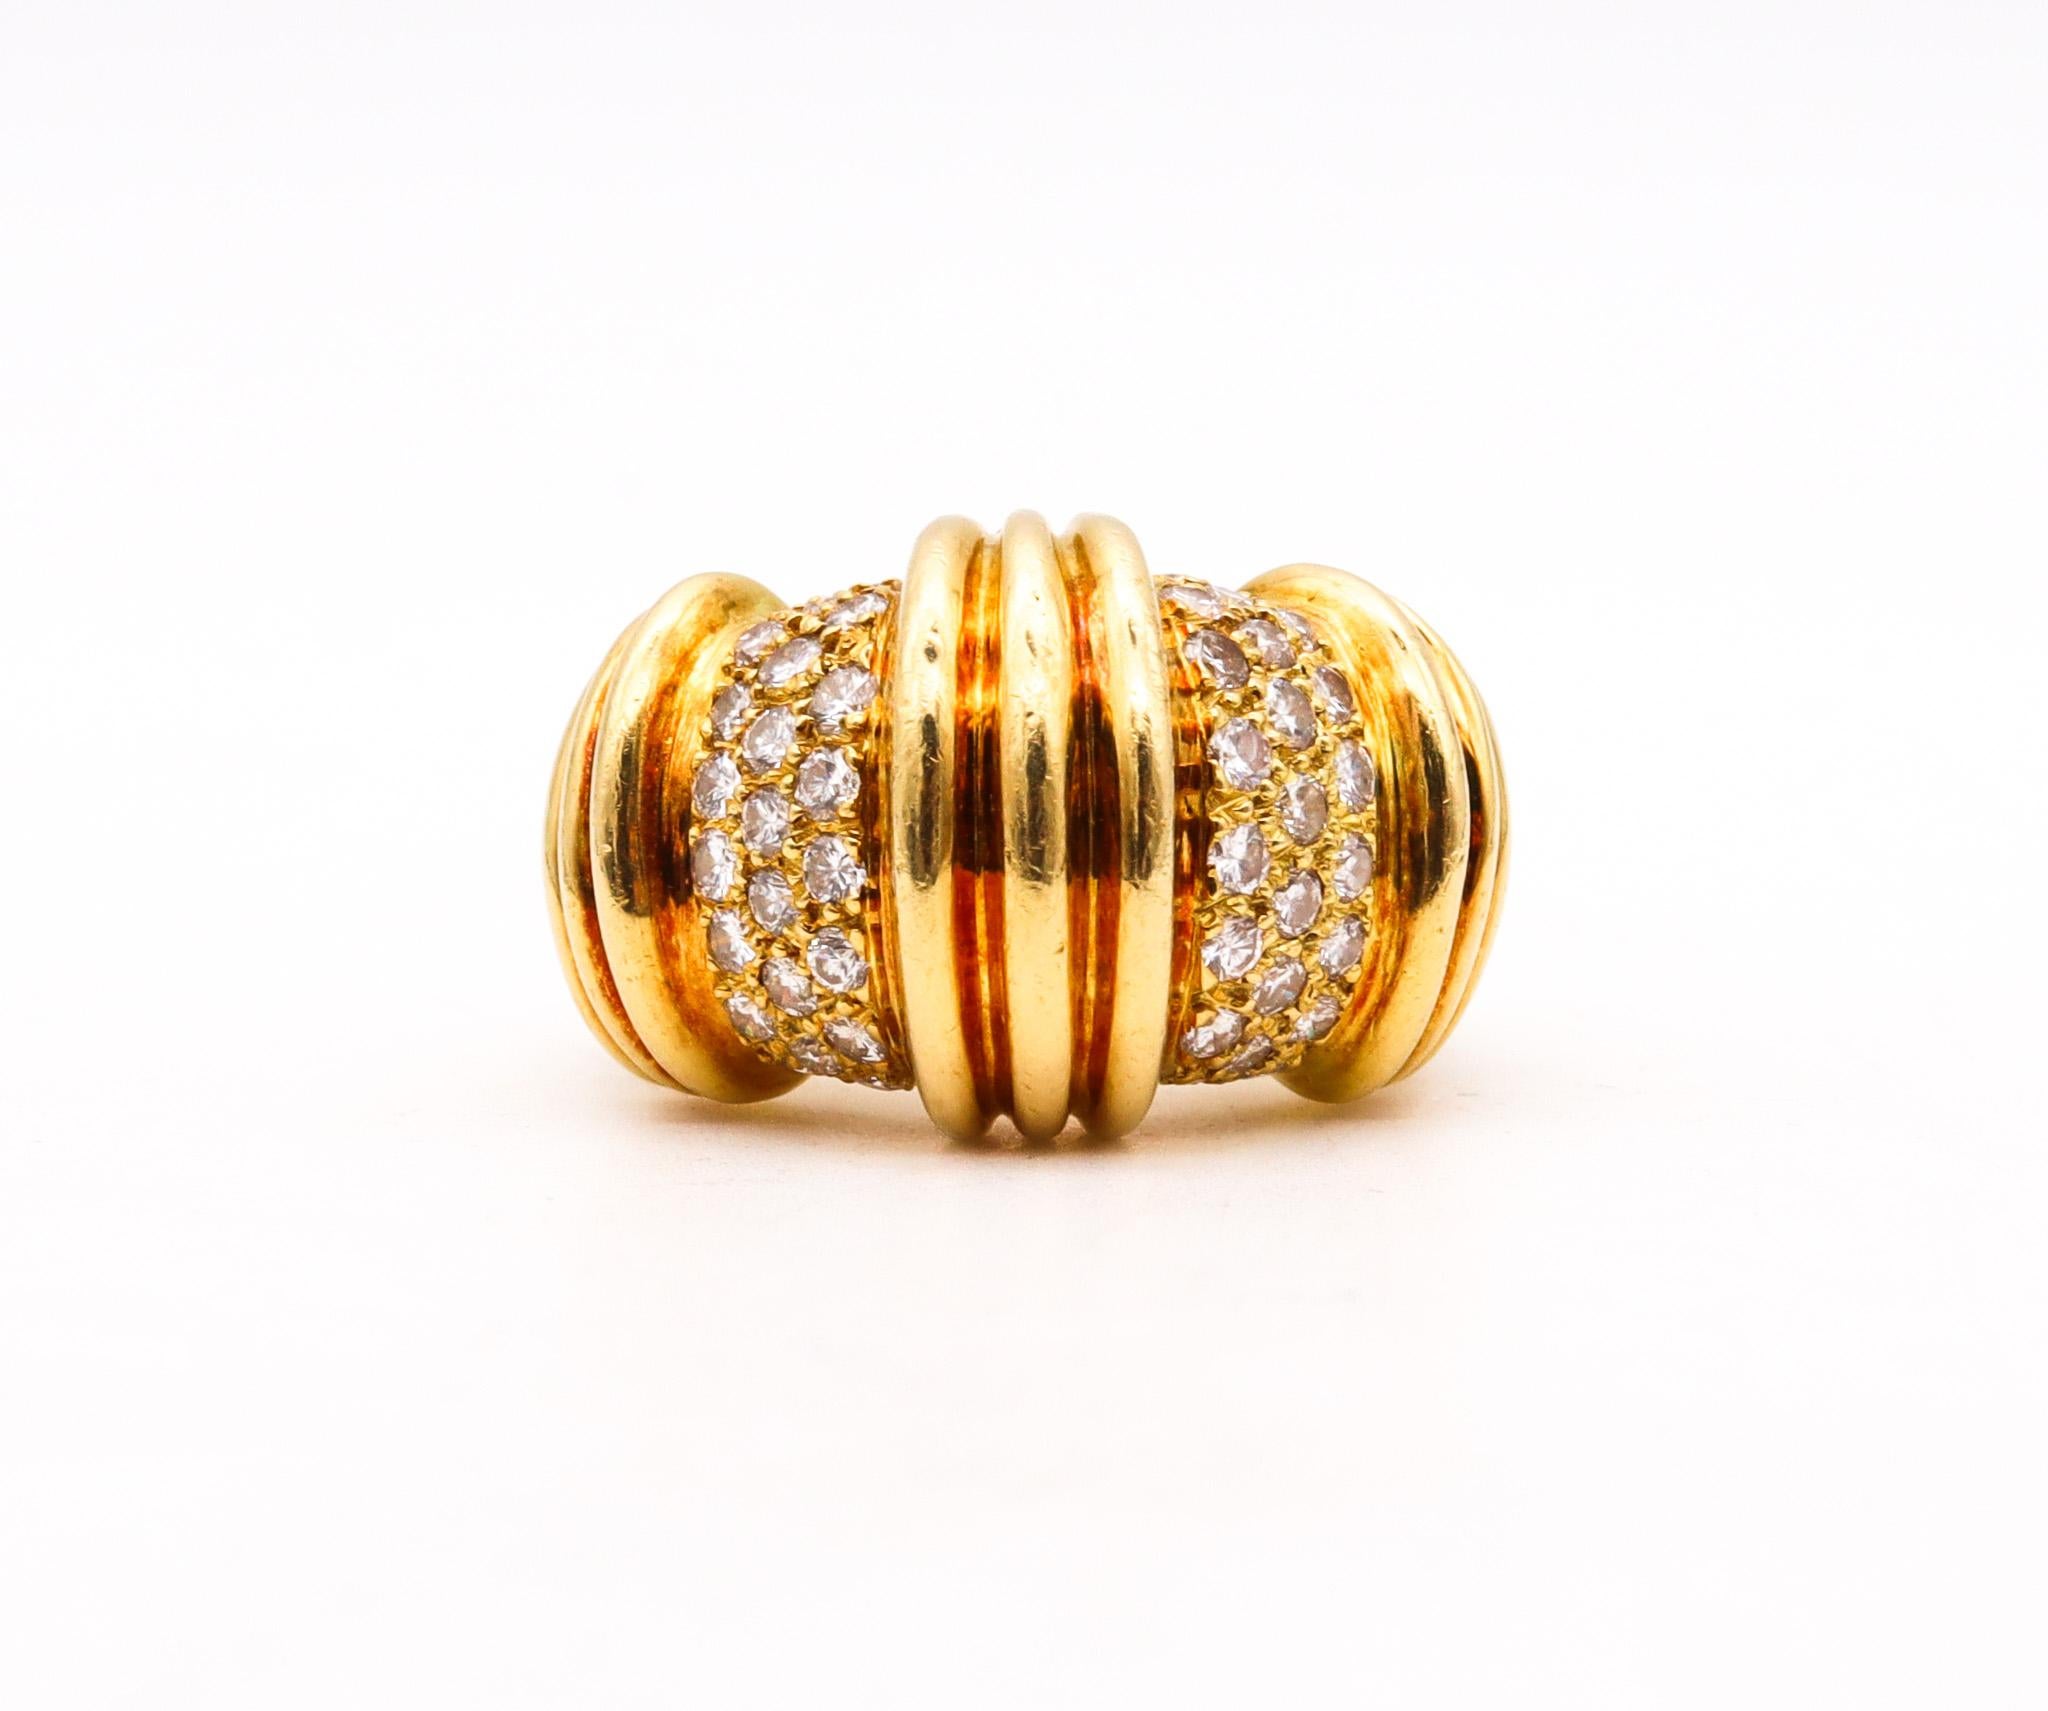 Brilliant Cut Charles Krypell Modernist Cocktail Ring In 18Kt Gold With 1.08 Cts In Diamonds